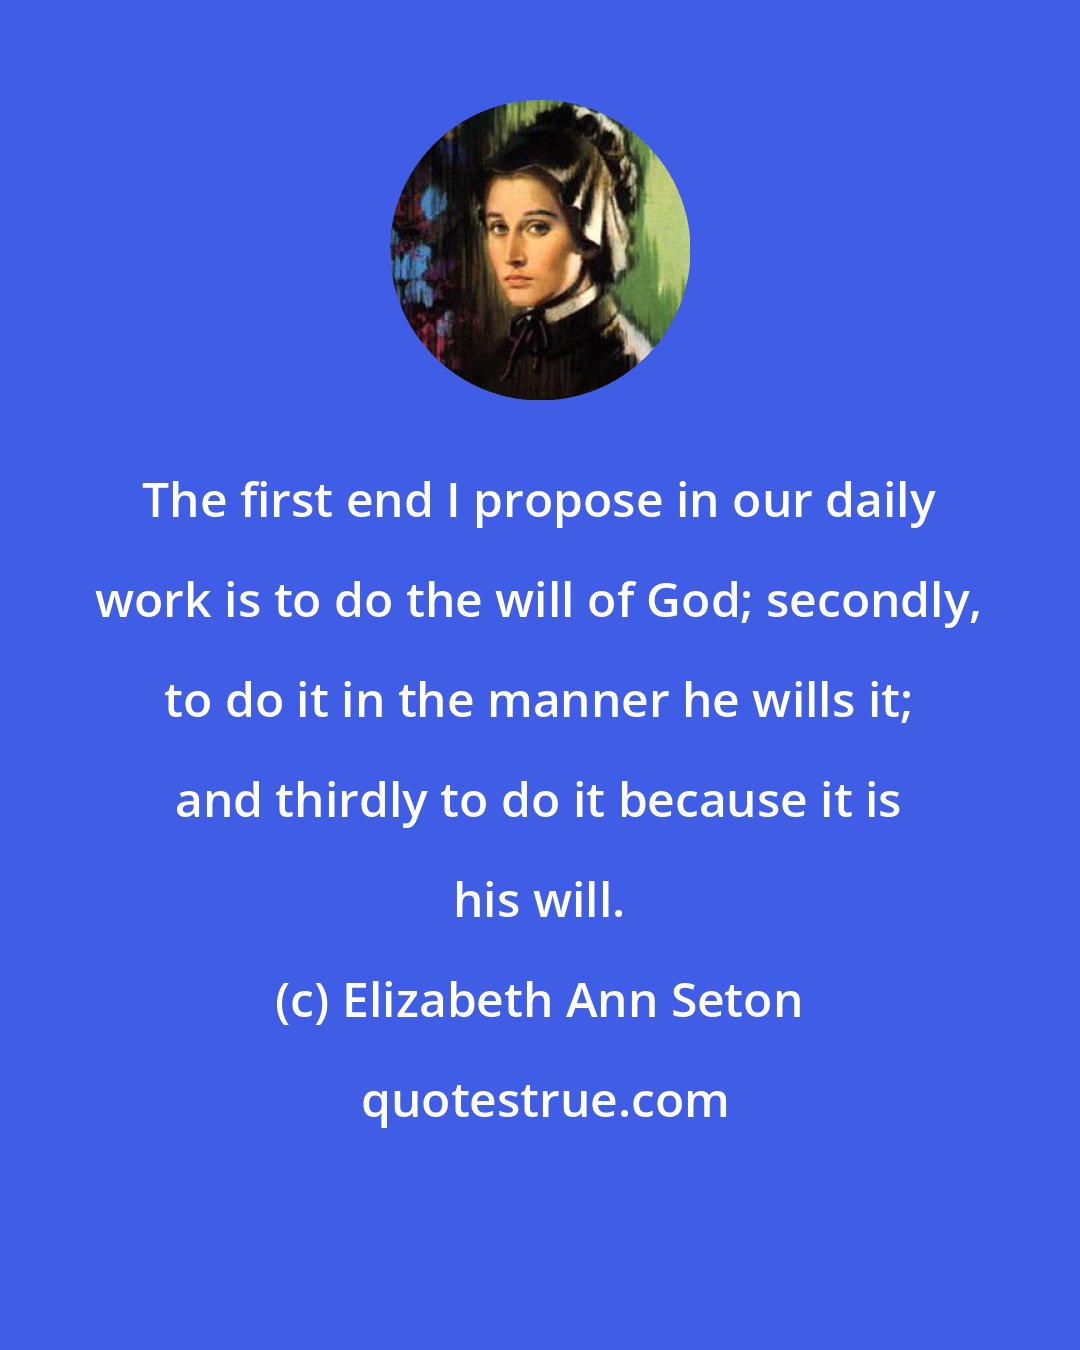 Elizabeth Ann Seton: The first end I propose in our daily work is to do the will of God; secondly, to do it in the manner he wills it; and thirdly to do it because it is his will.